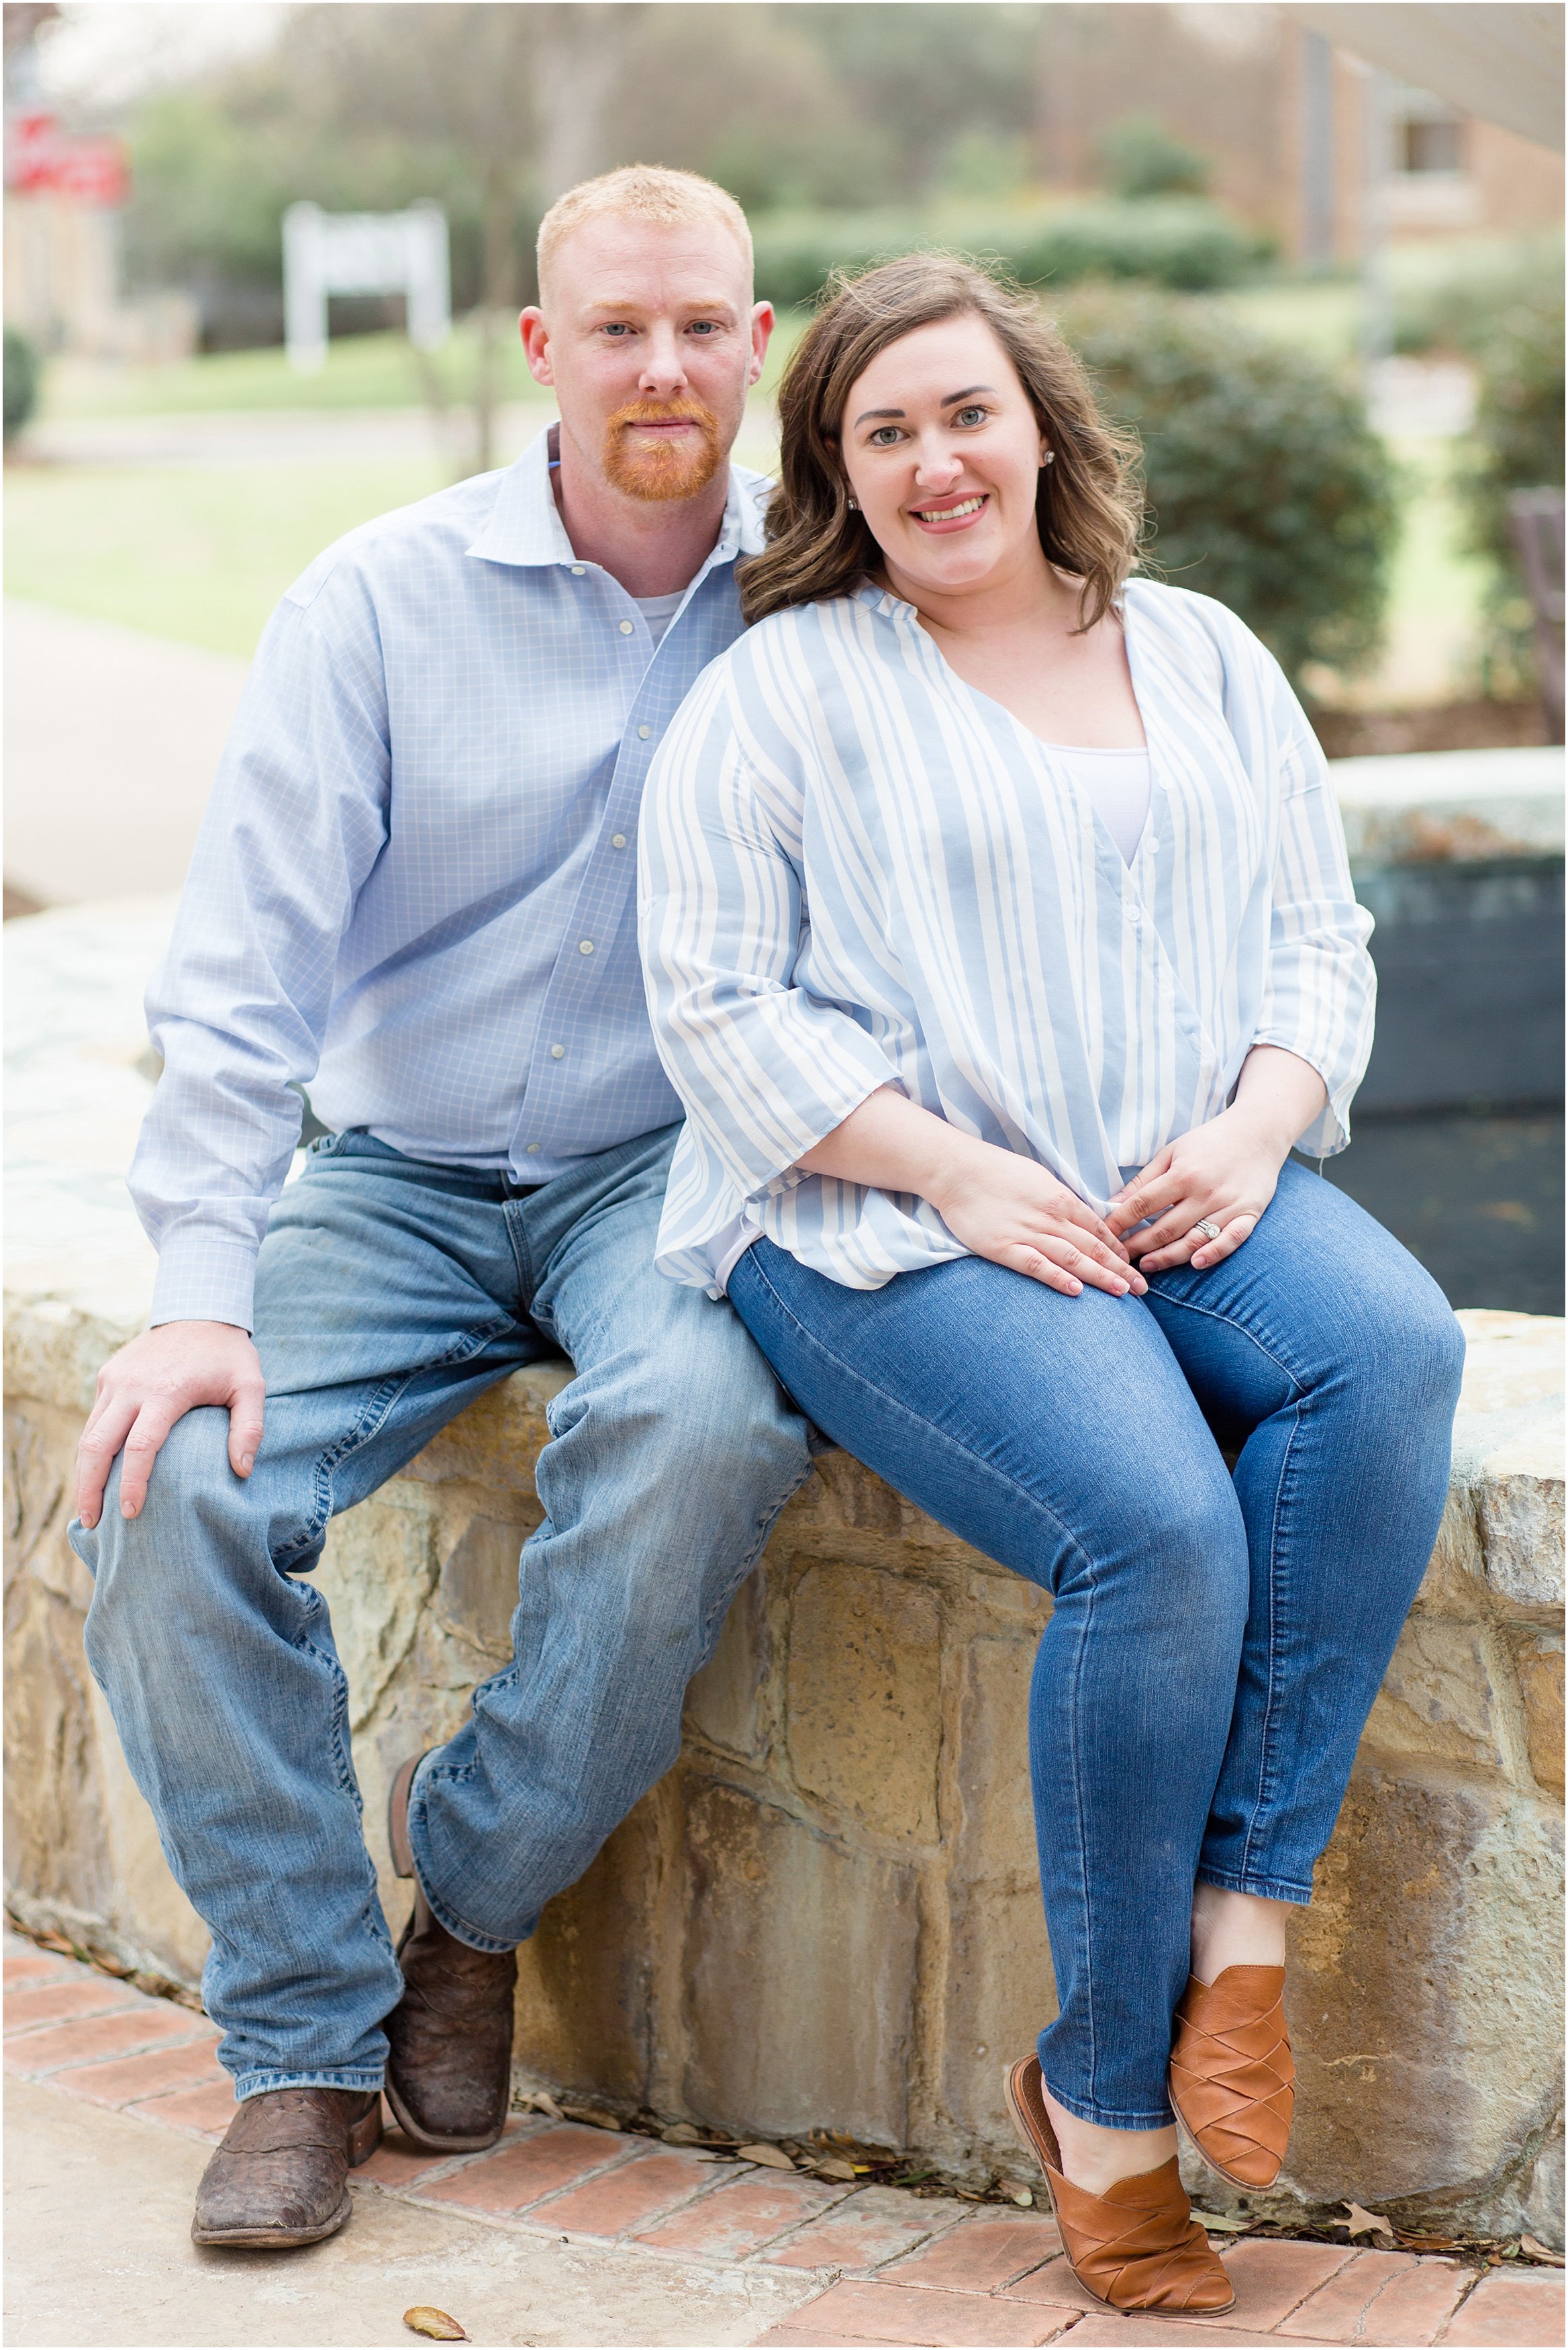 A couple in Historic Downtown McKinney Square by Rebecca Rice Photography